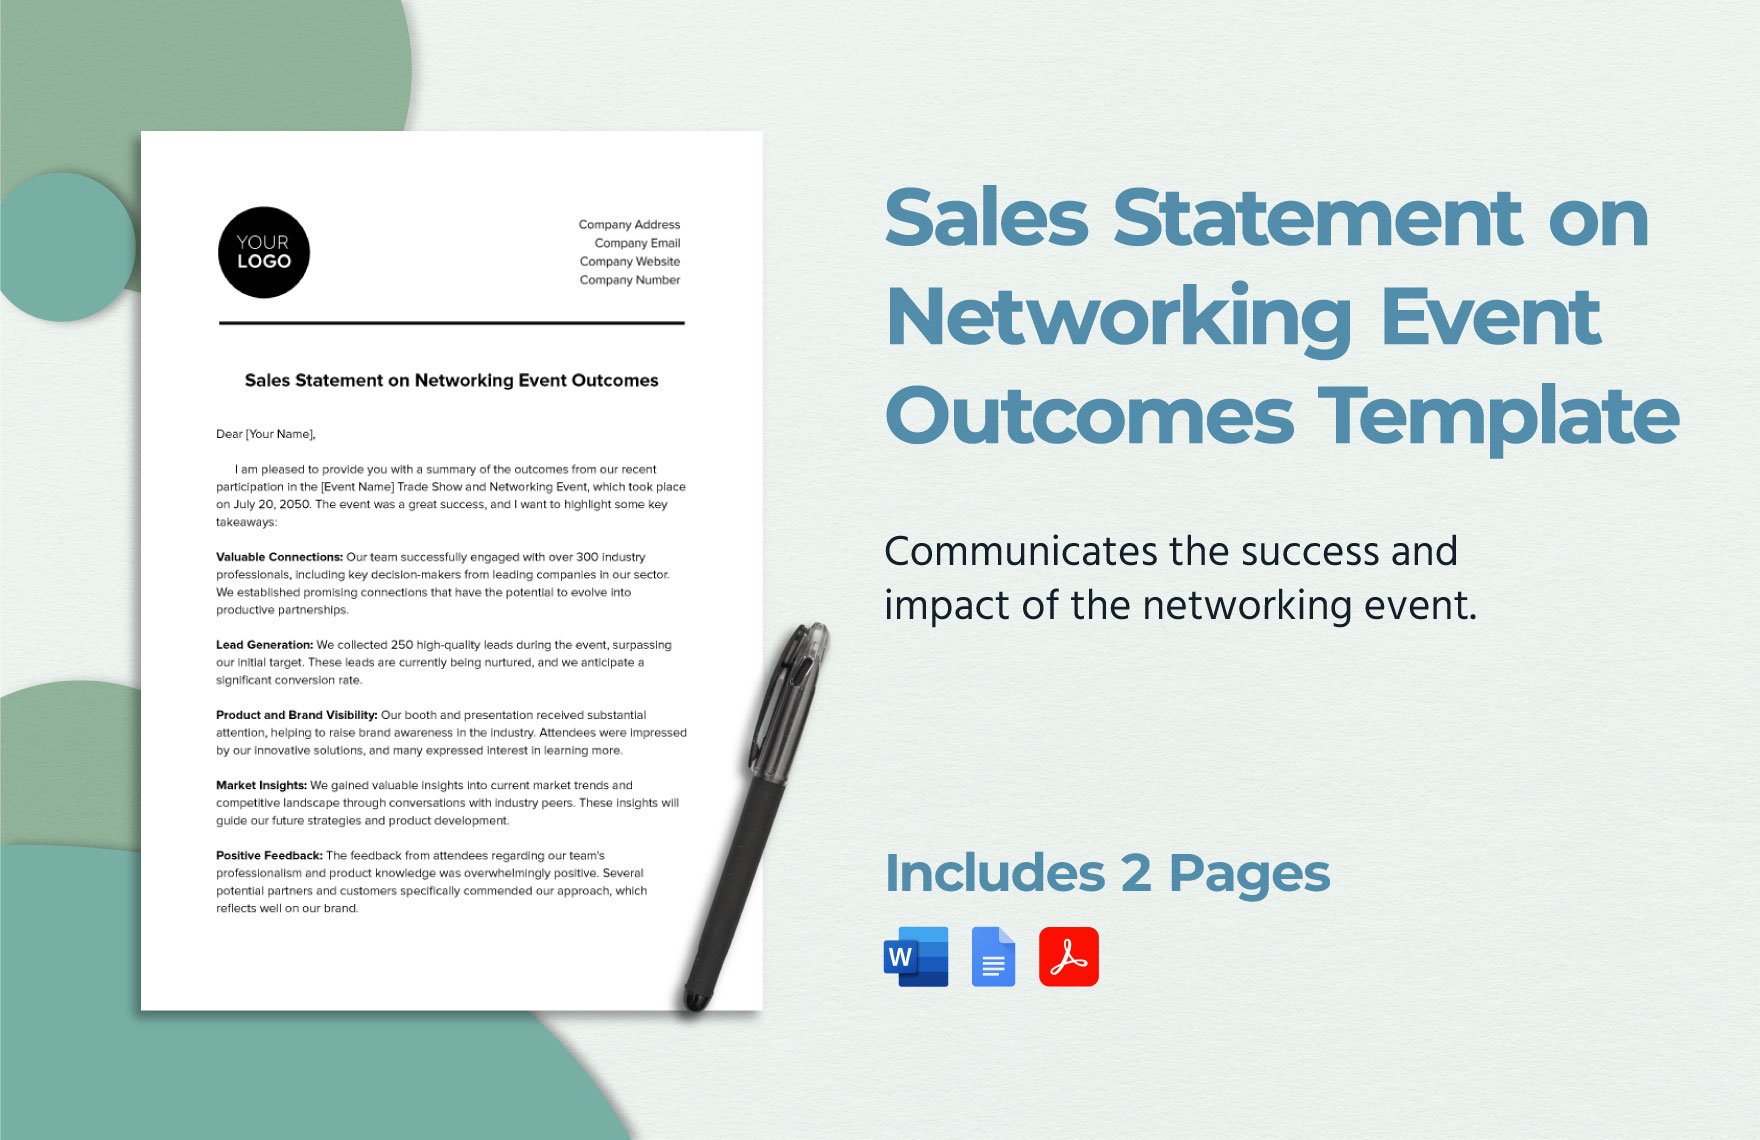 Sales Statement on Networking Event Outcomes Template